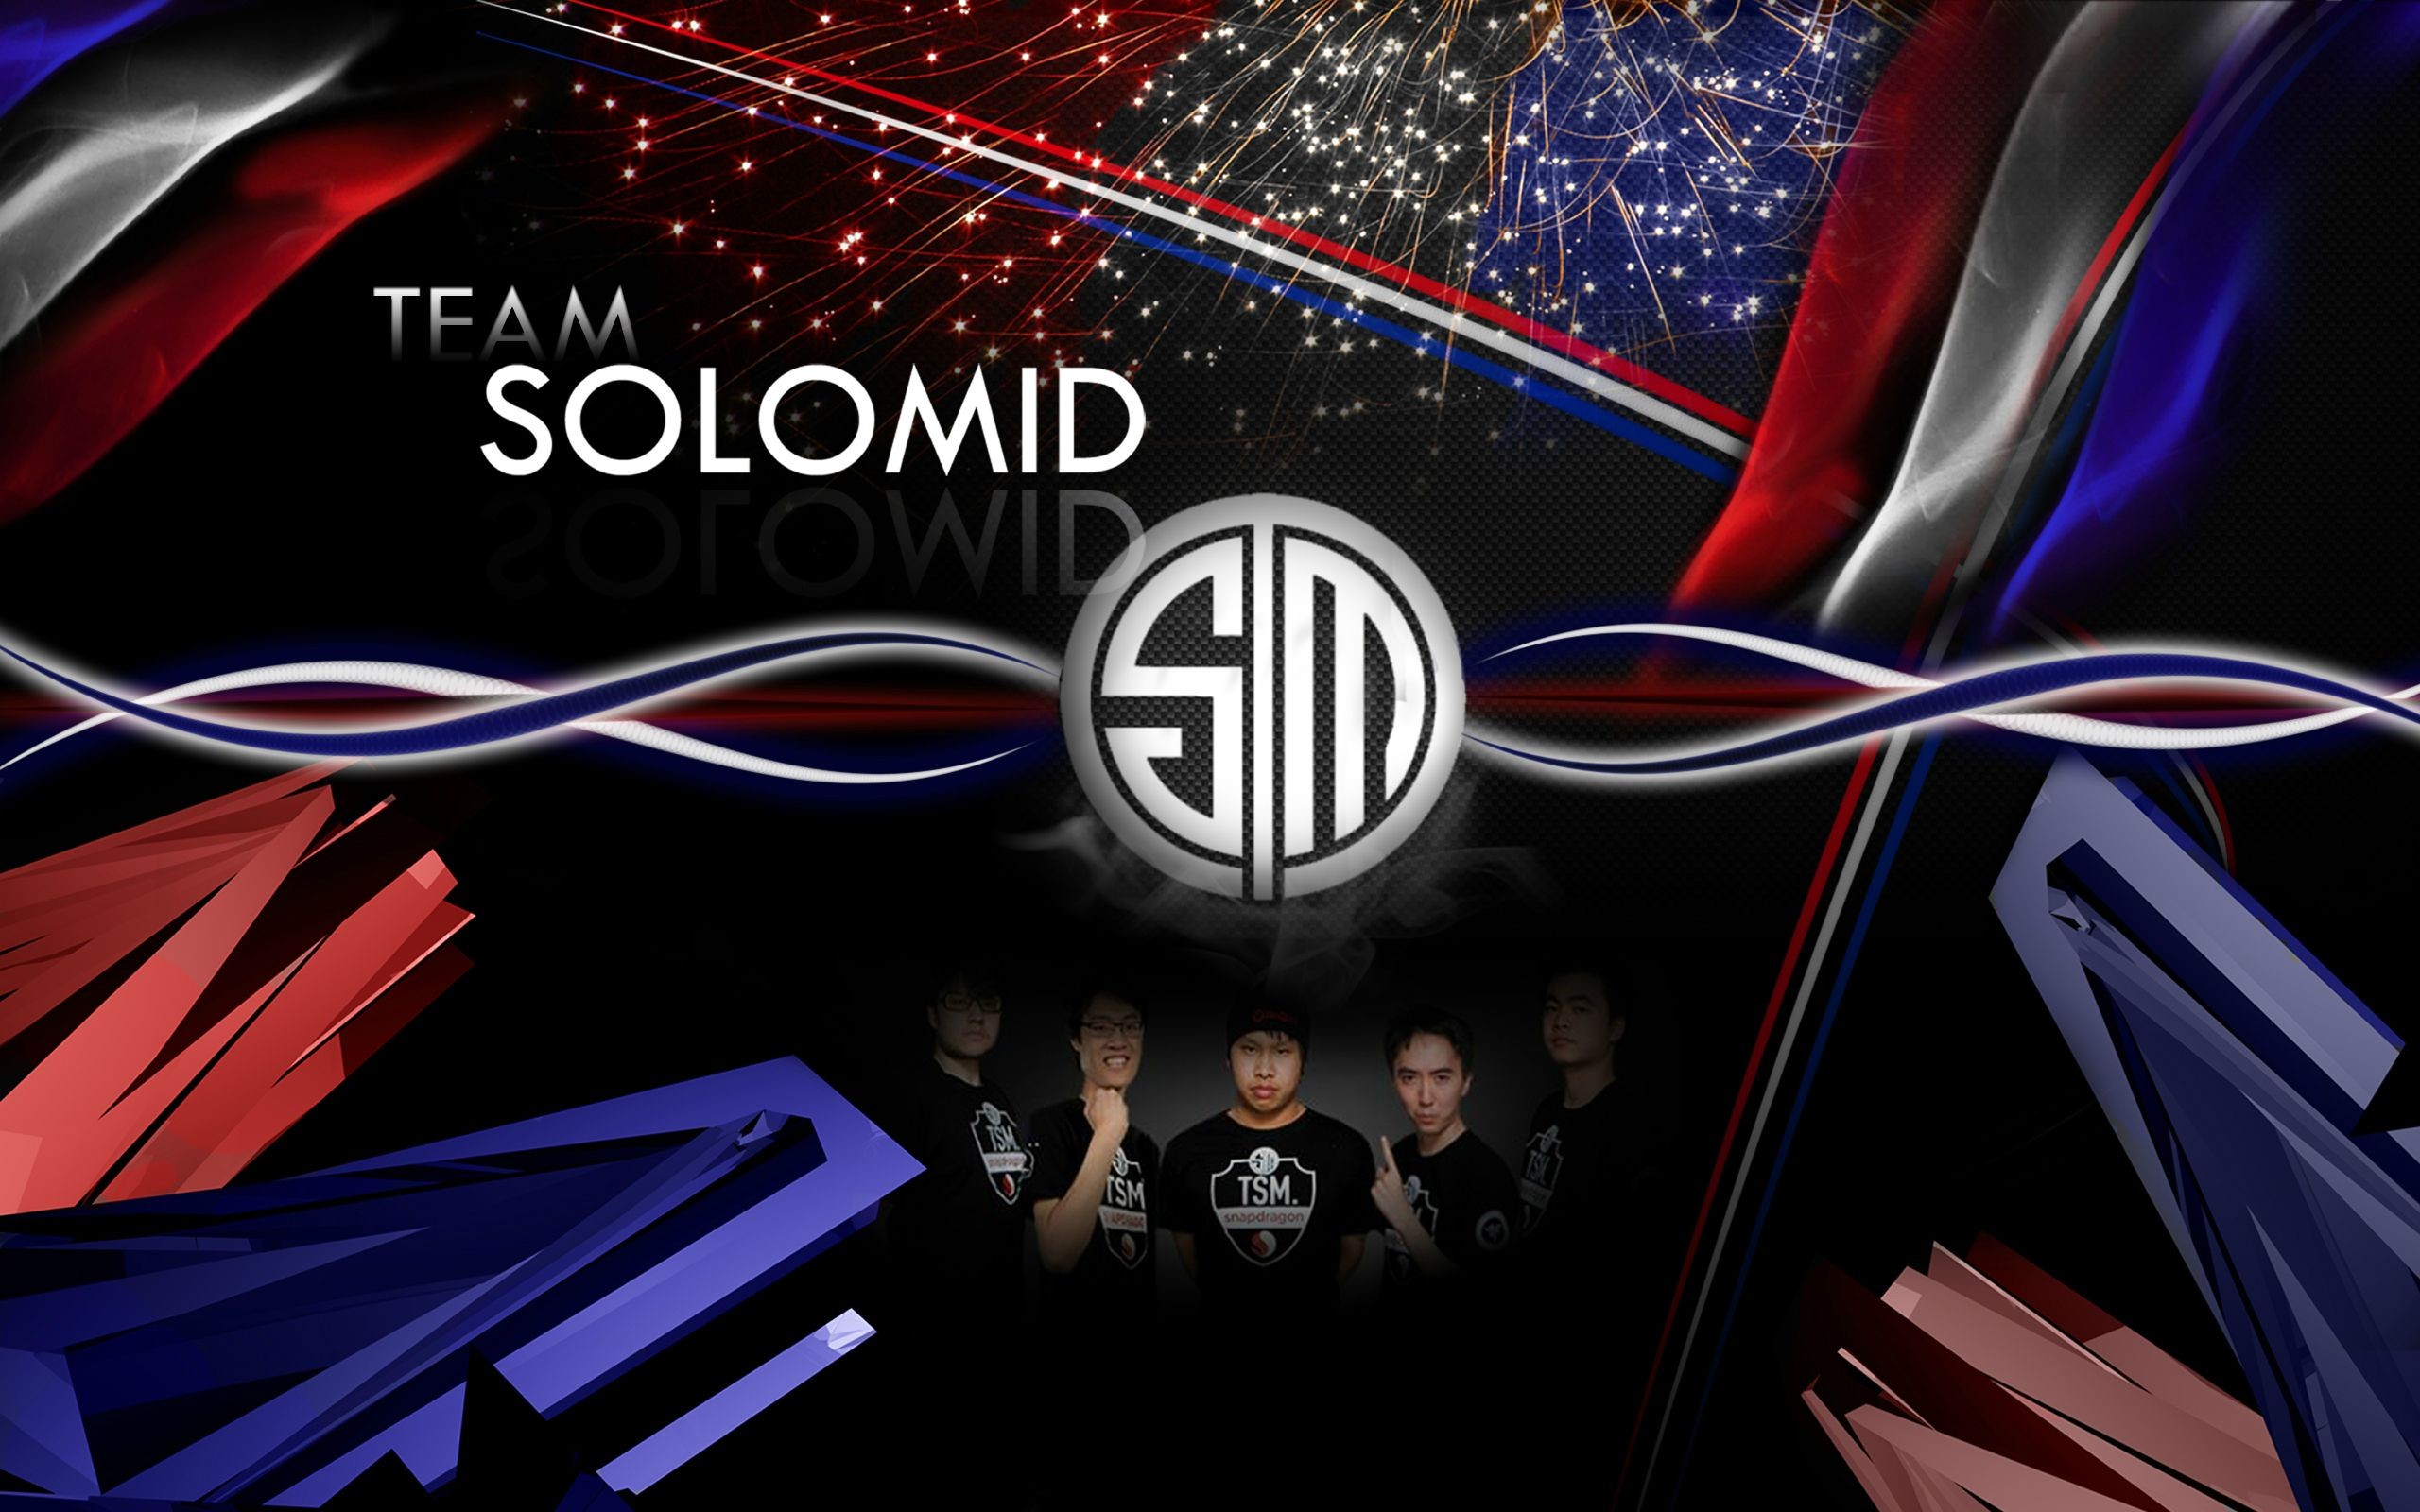 General 2560x1600 Team Solomid League of Legends Dyrus e-sports PC gaming